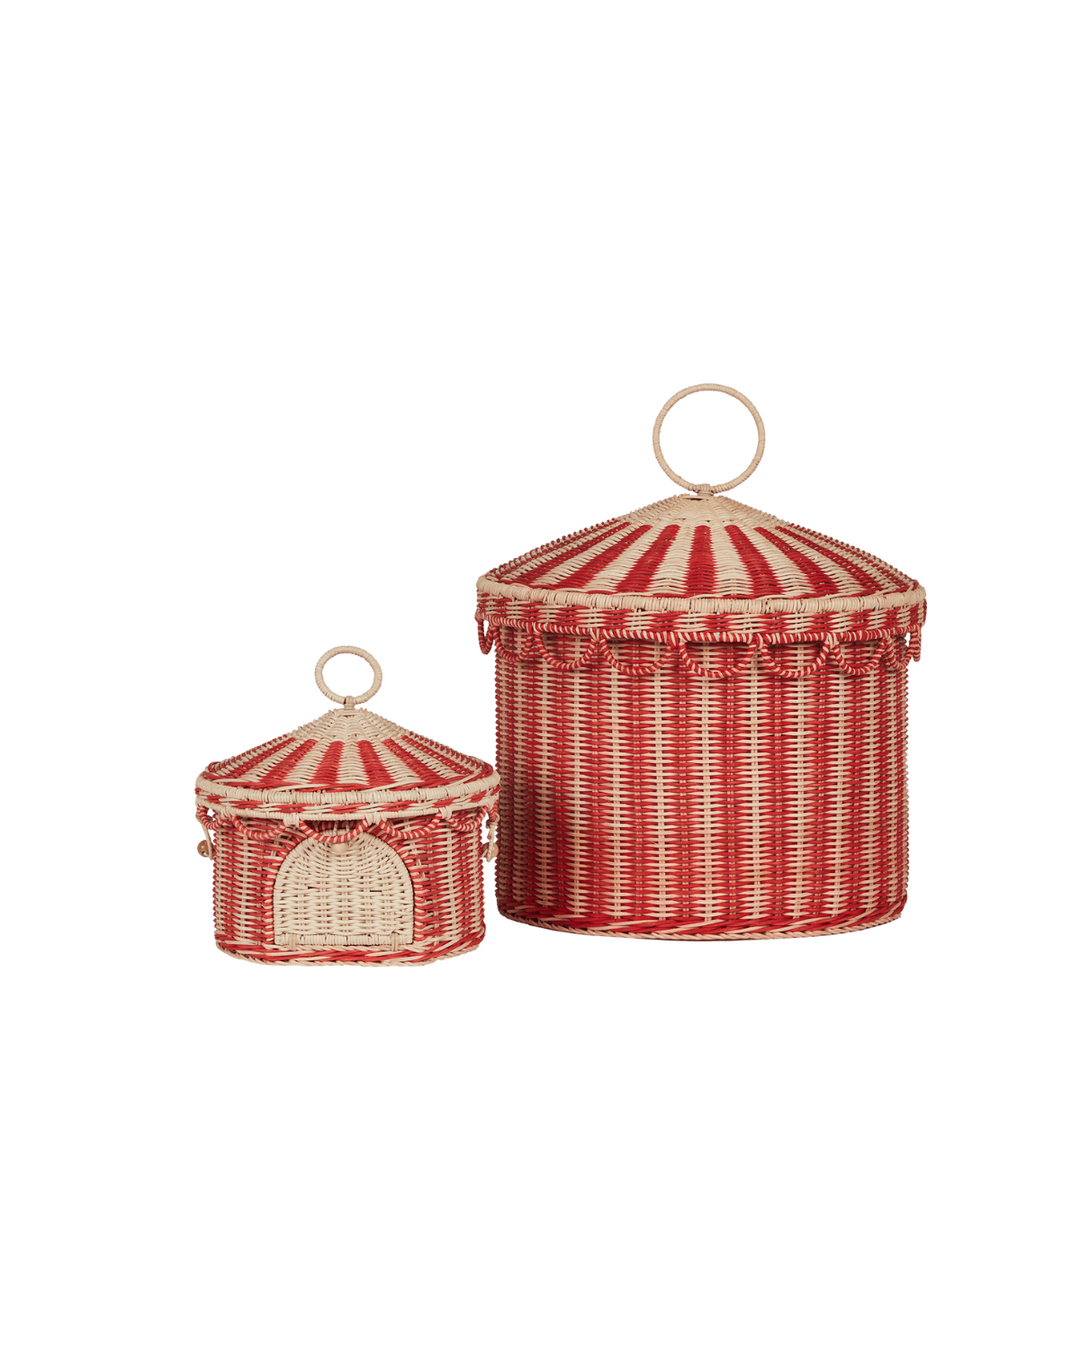 Decorative Red and Straw Circus Tent Basket for living room.